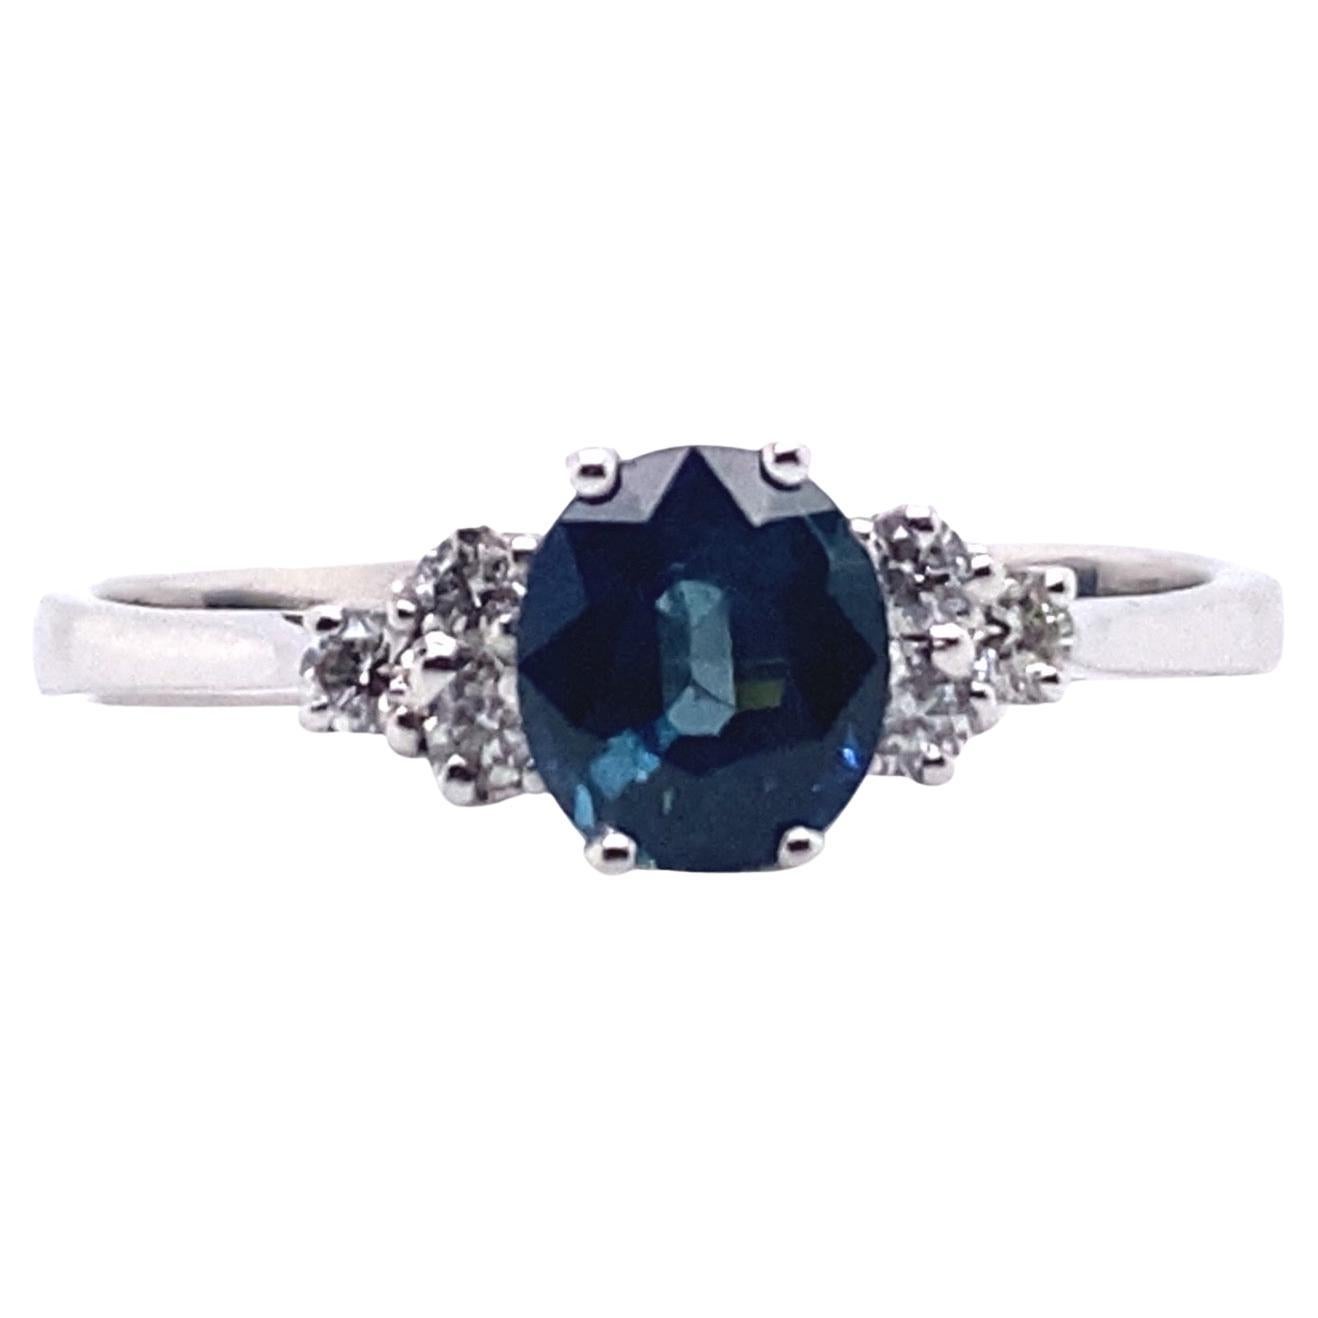 21st Century Exquisite 18K White Gold Sapphire and Diamond Cluster Ring